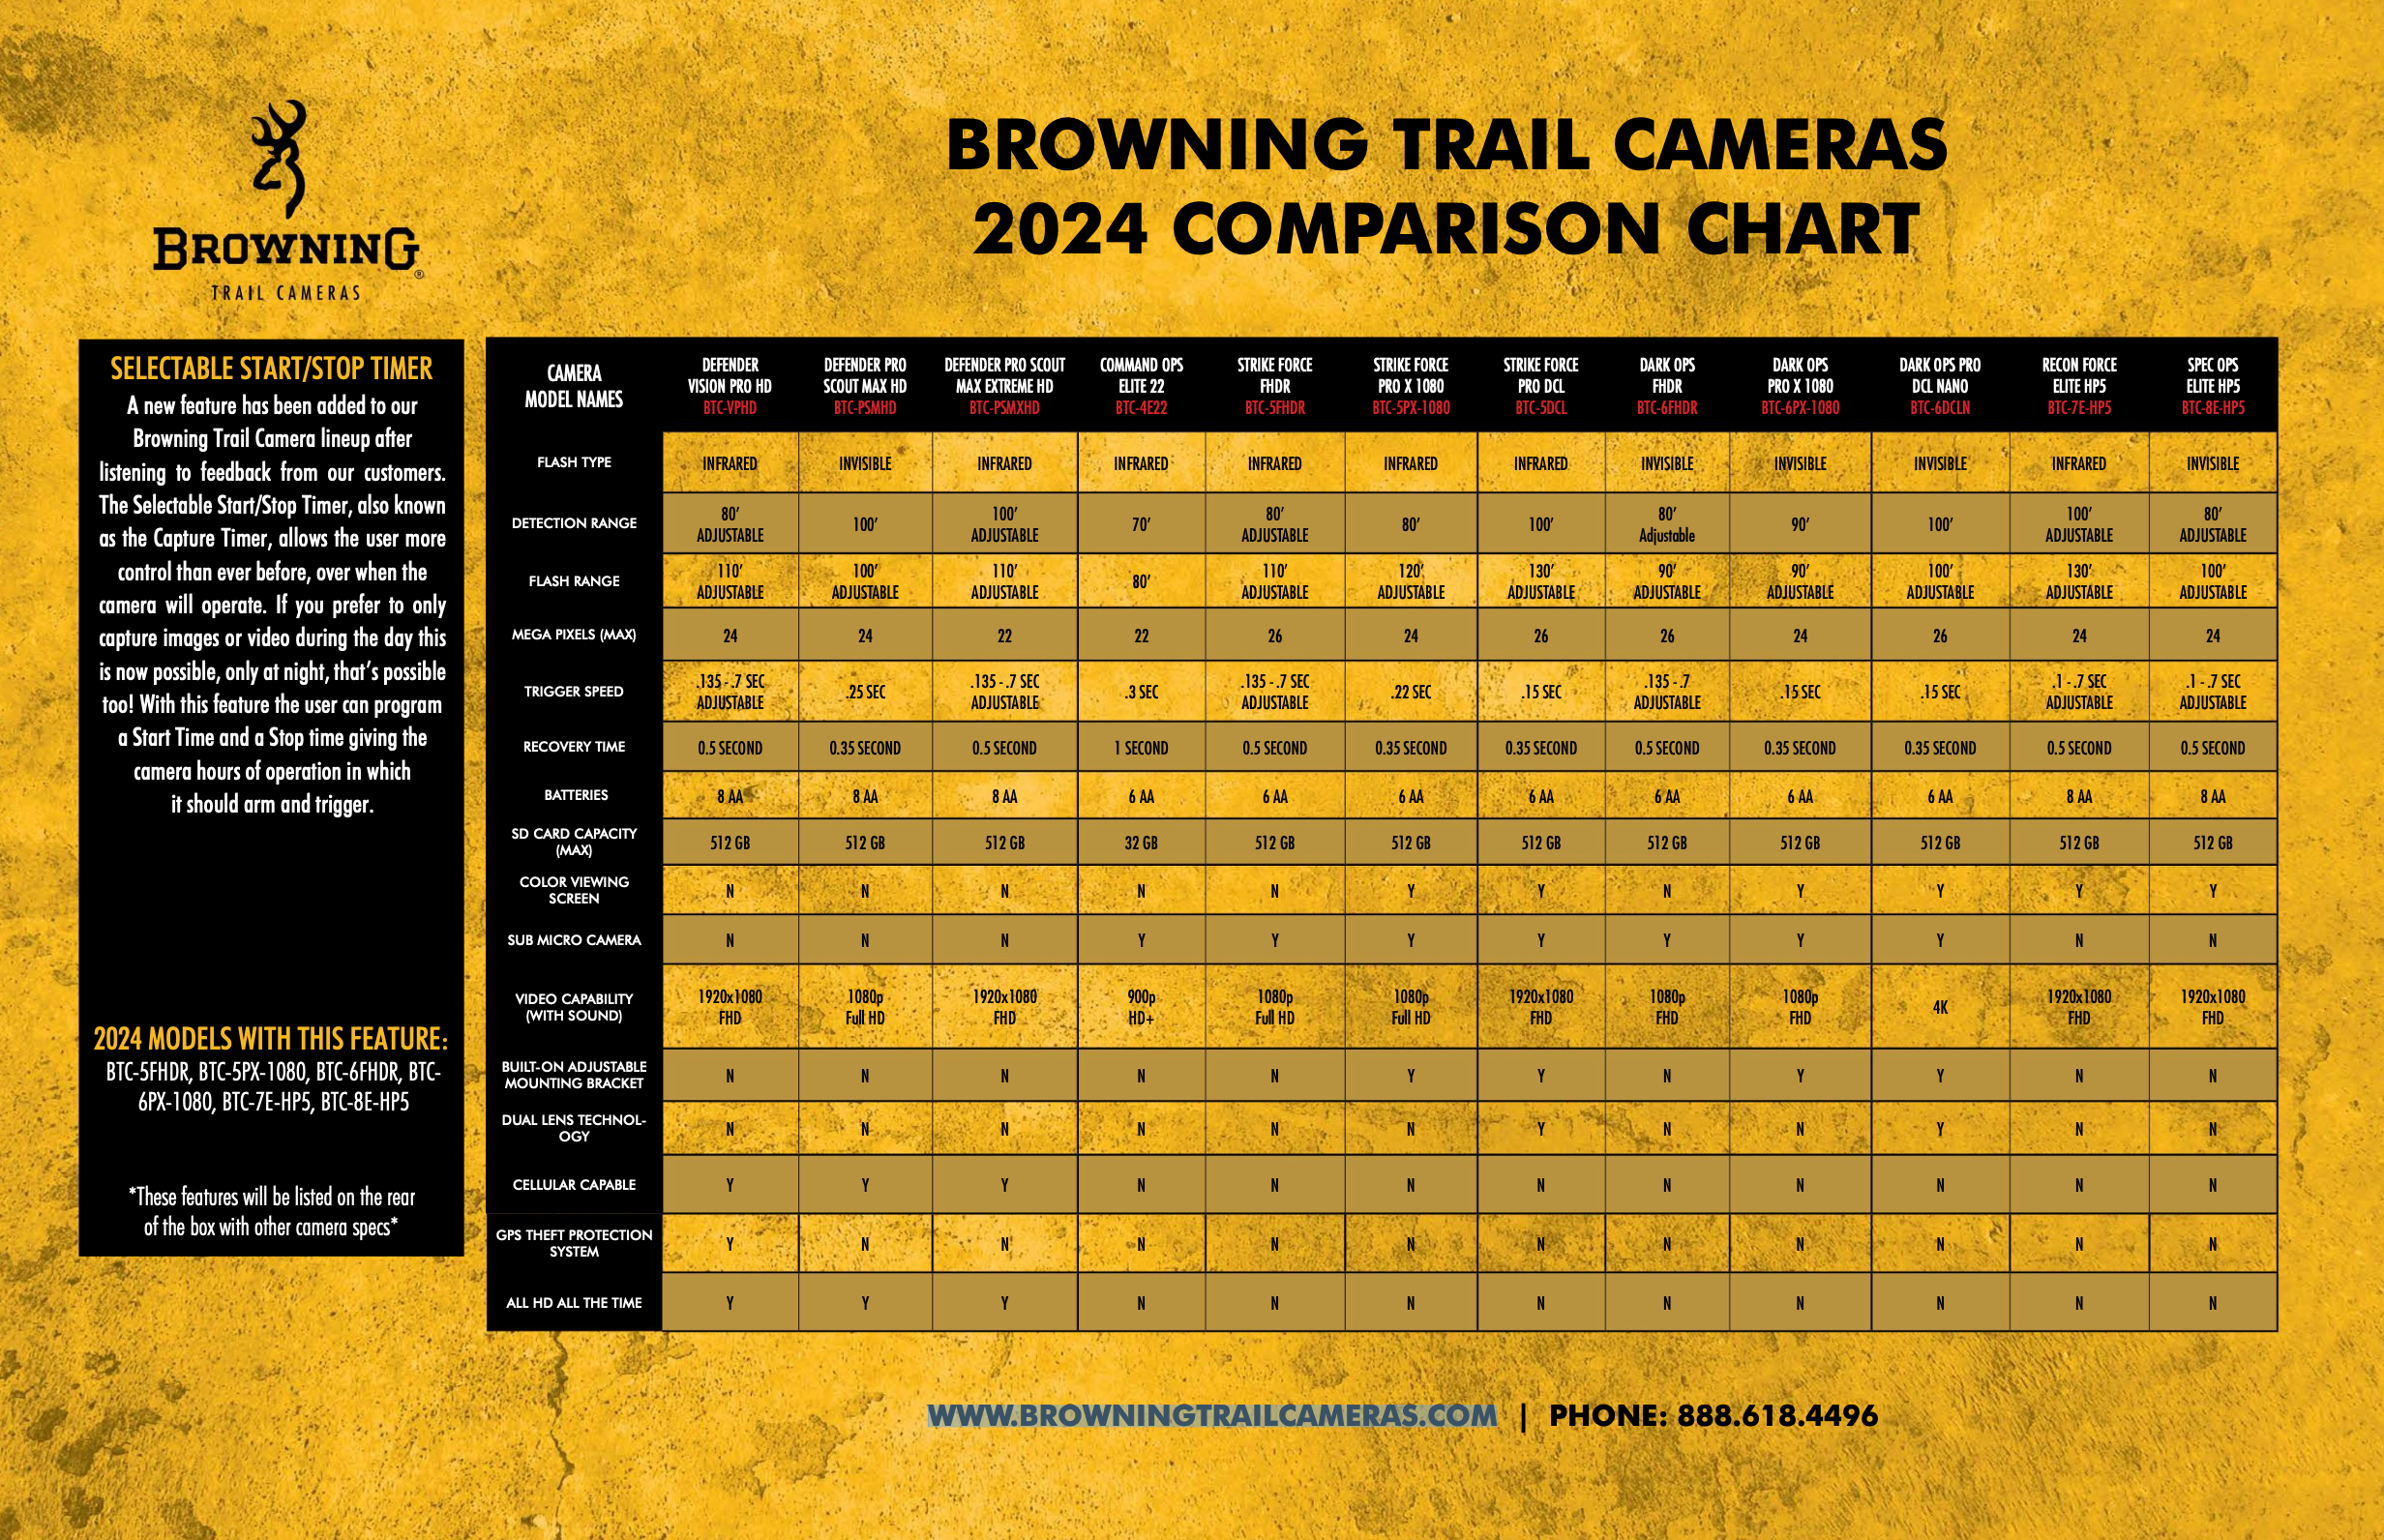 Browning Trail Cameras Comparison Chart